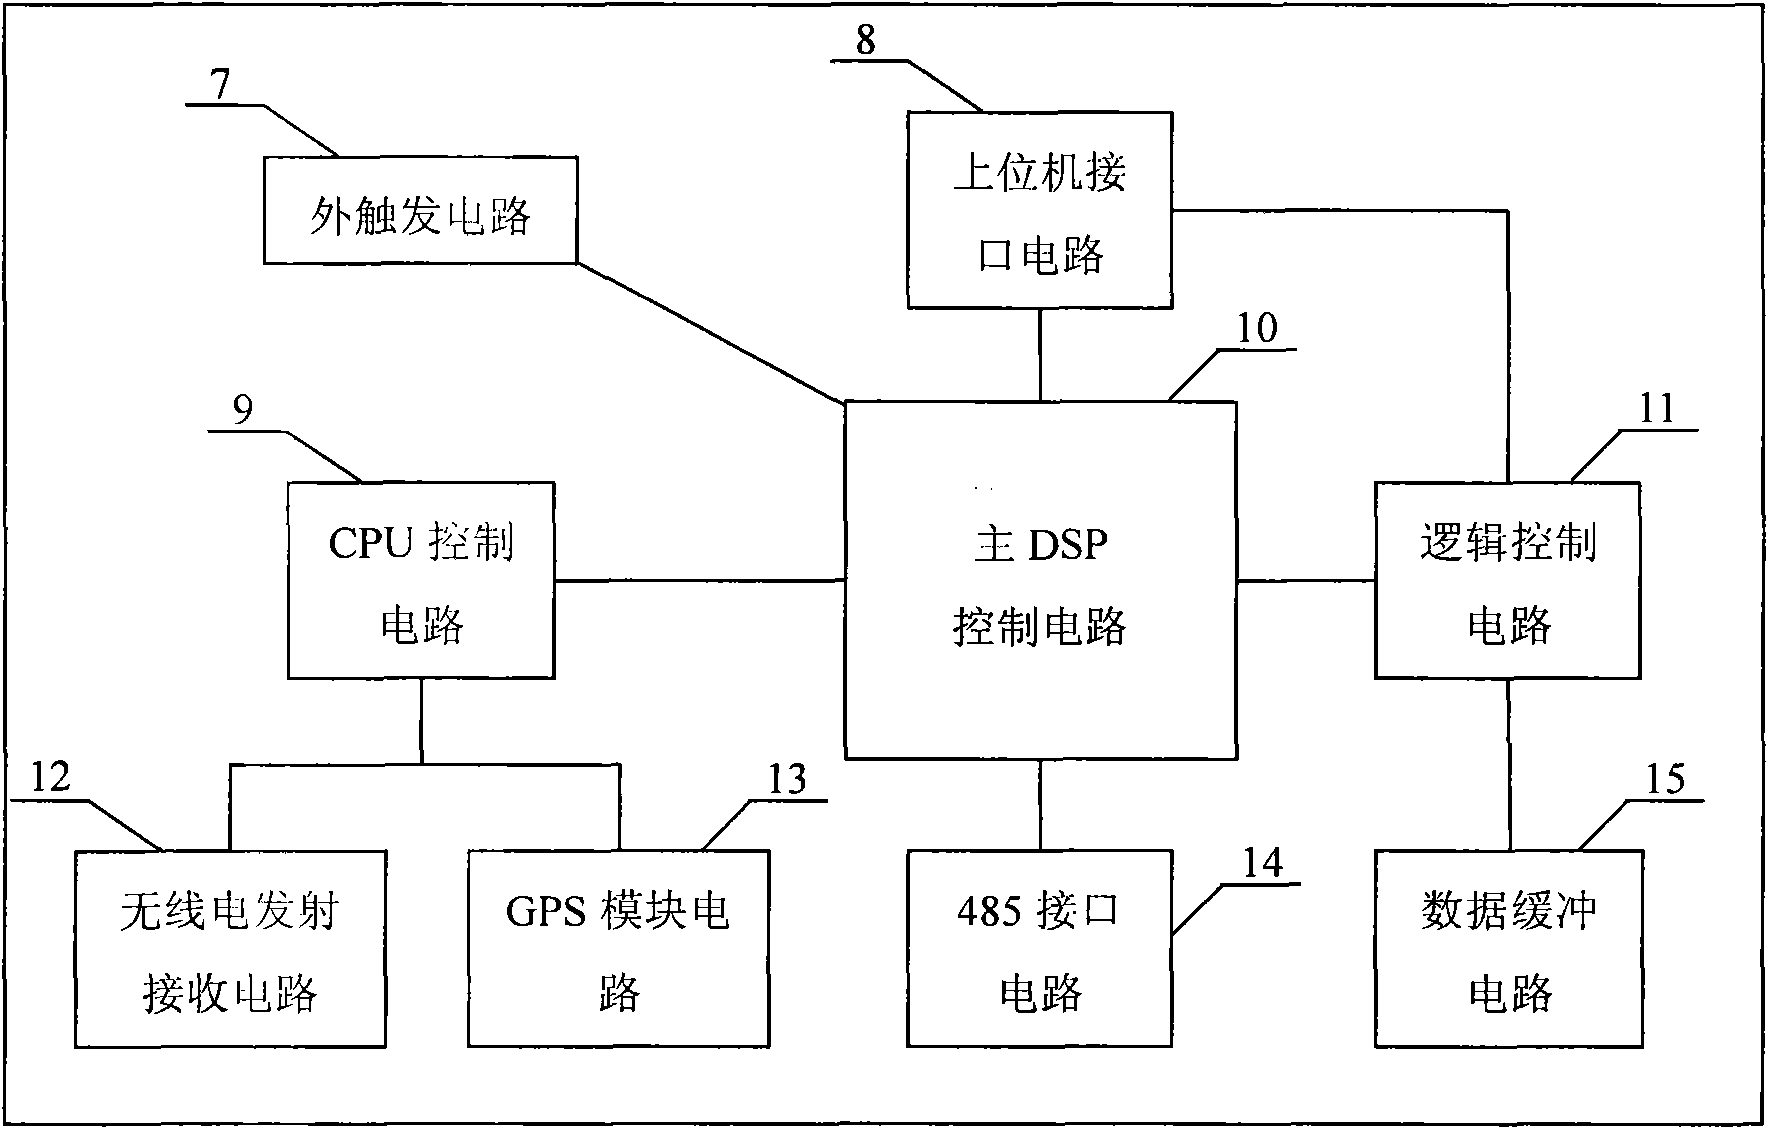 Distributed parallel potential acquisition system